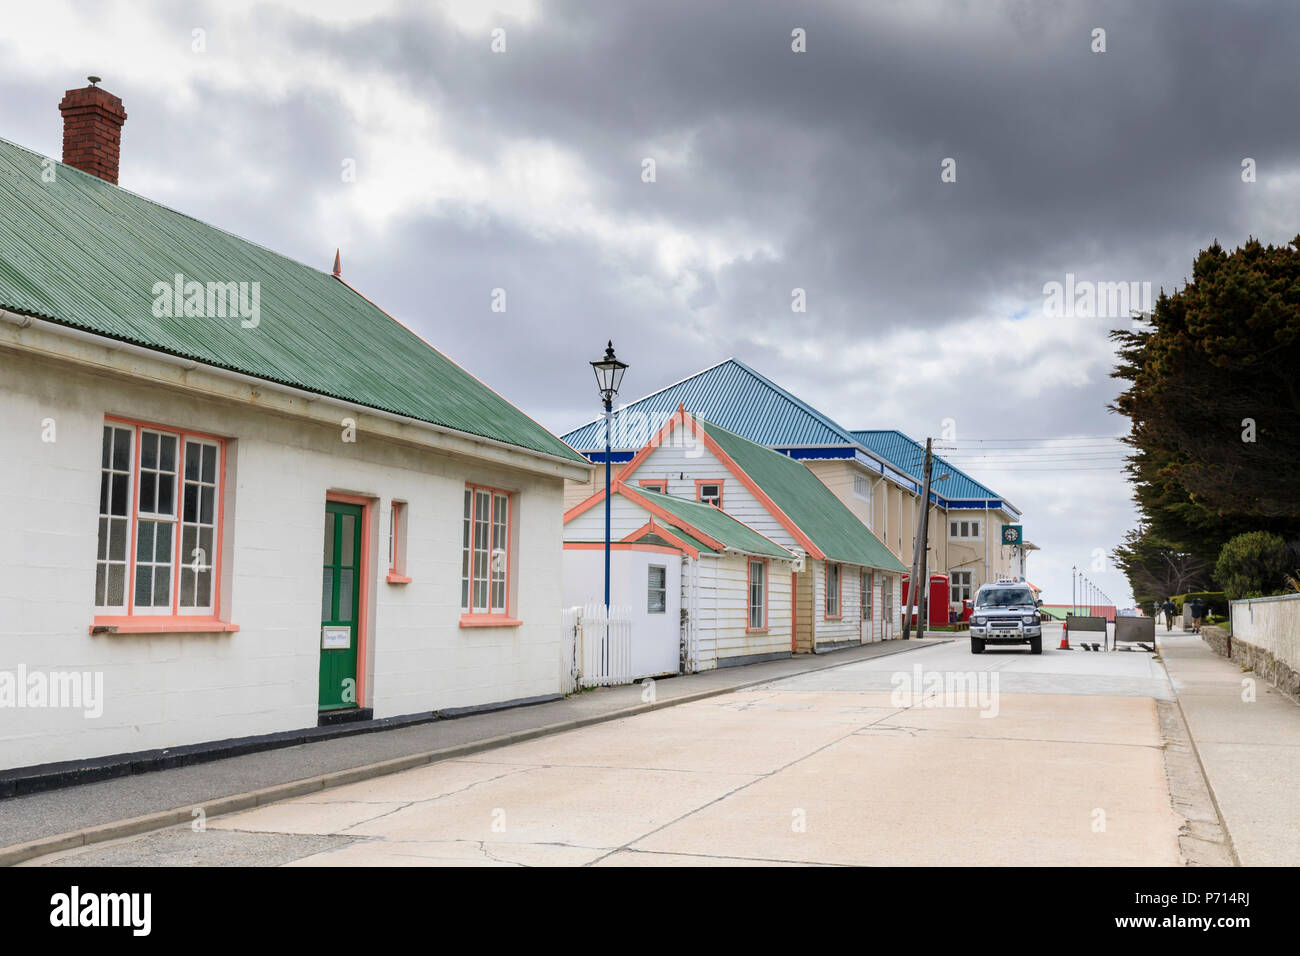 Traditional buildings with pastel iron roofs, Post Office, phone boxes, taxi, Central Stanley, Port Stanley, Falkland Islands, South America Stock Photo